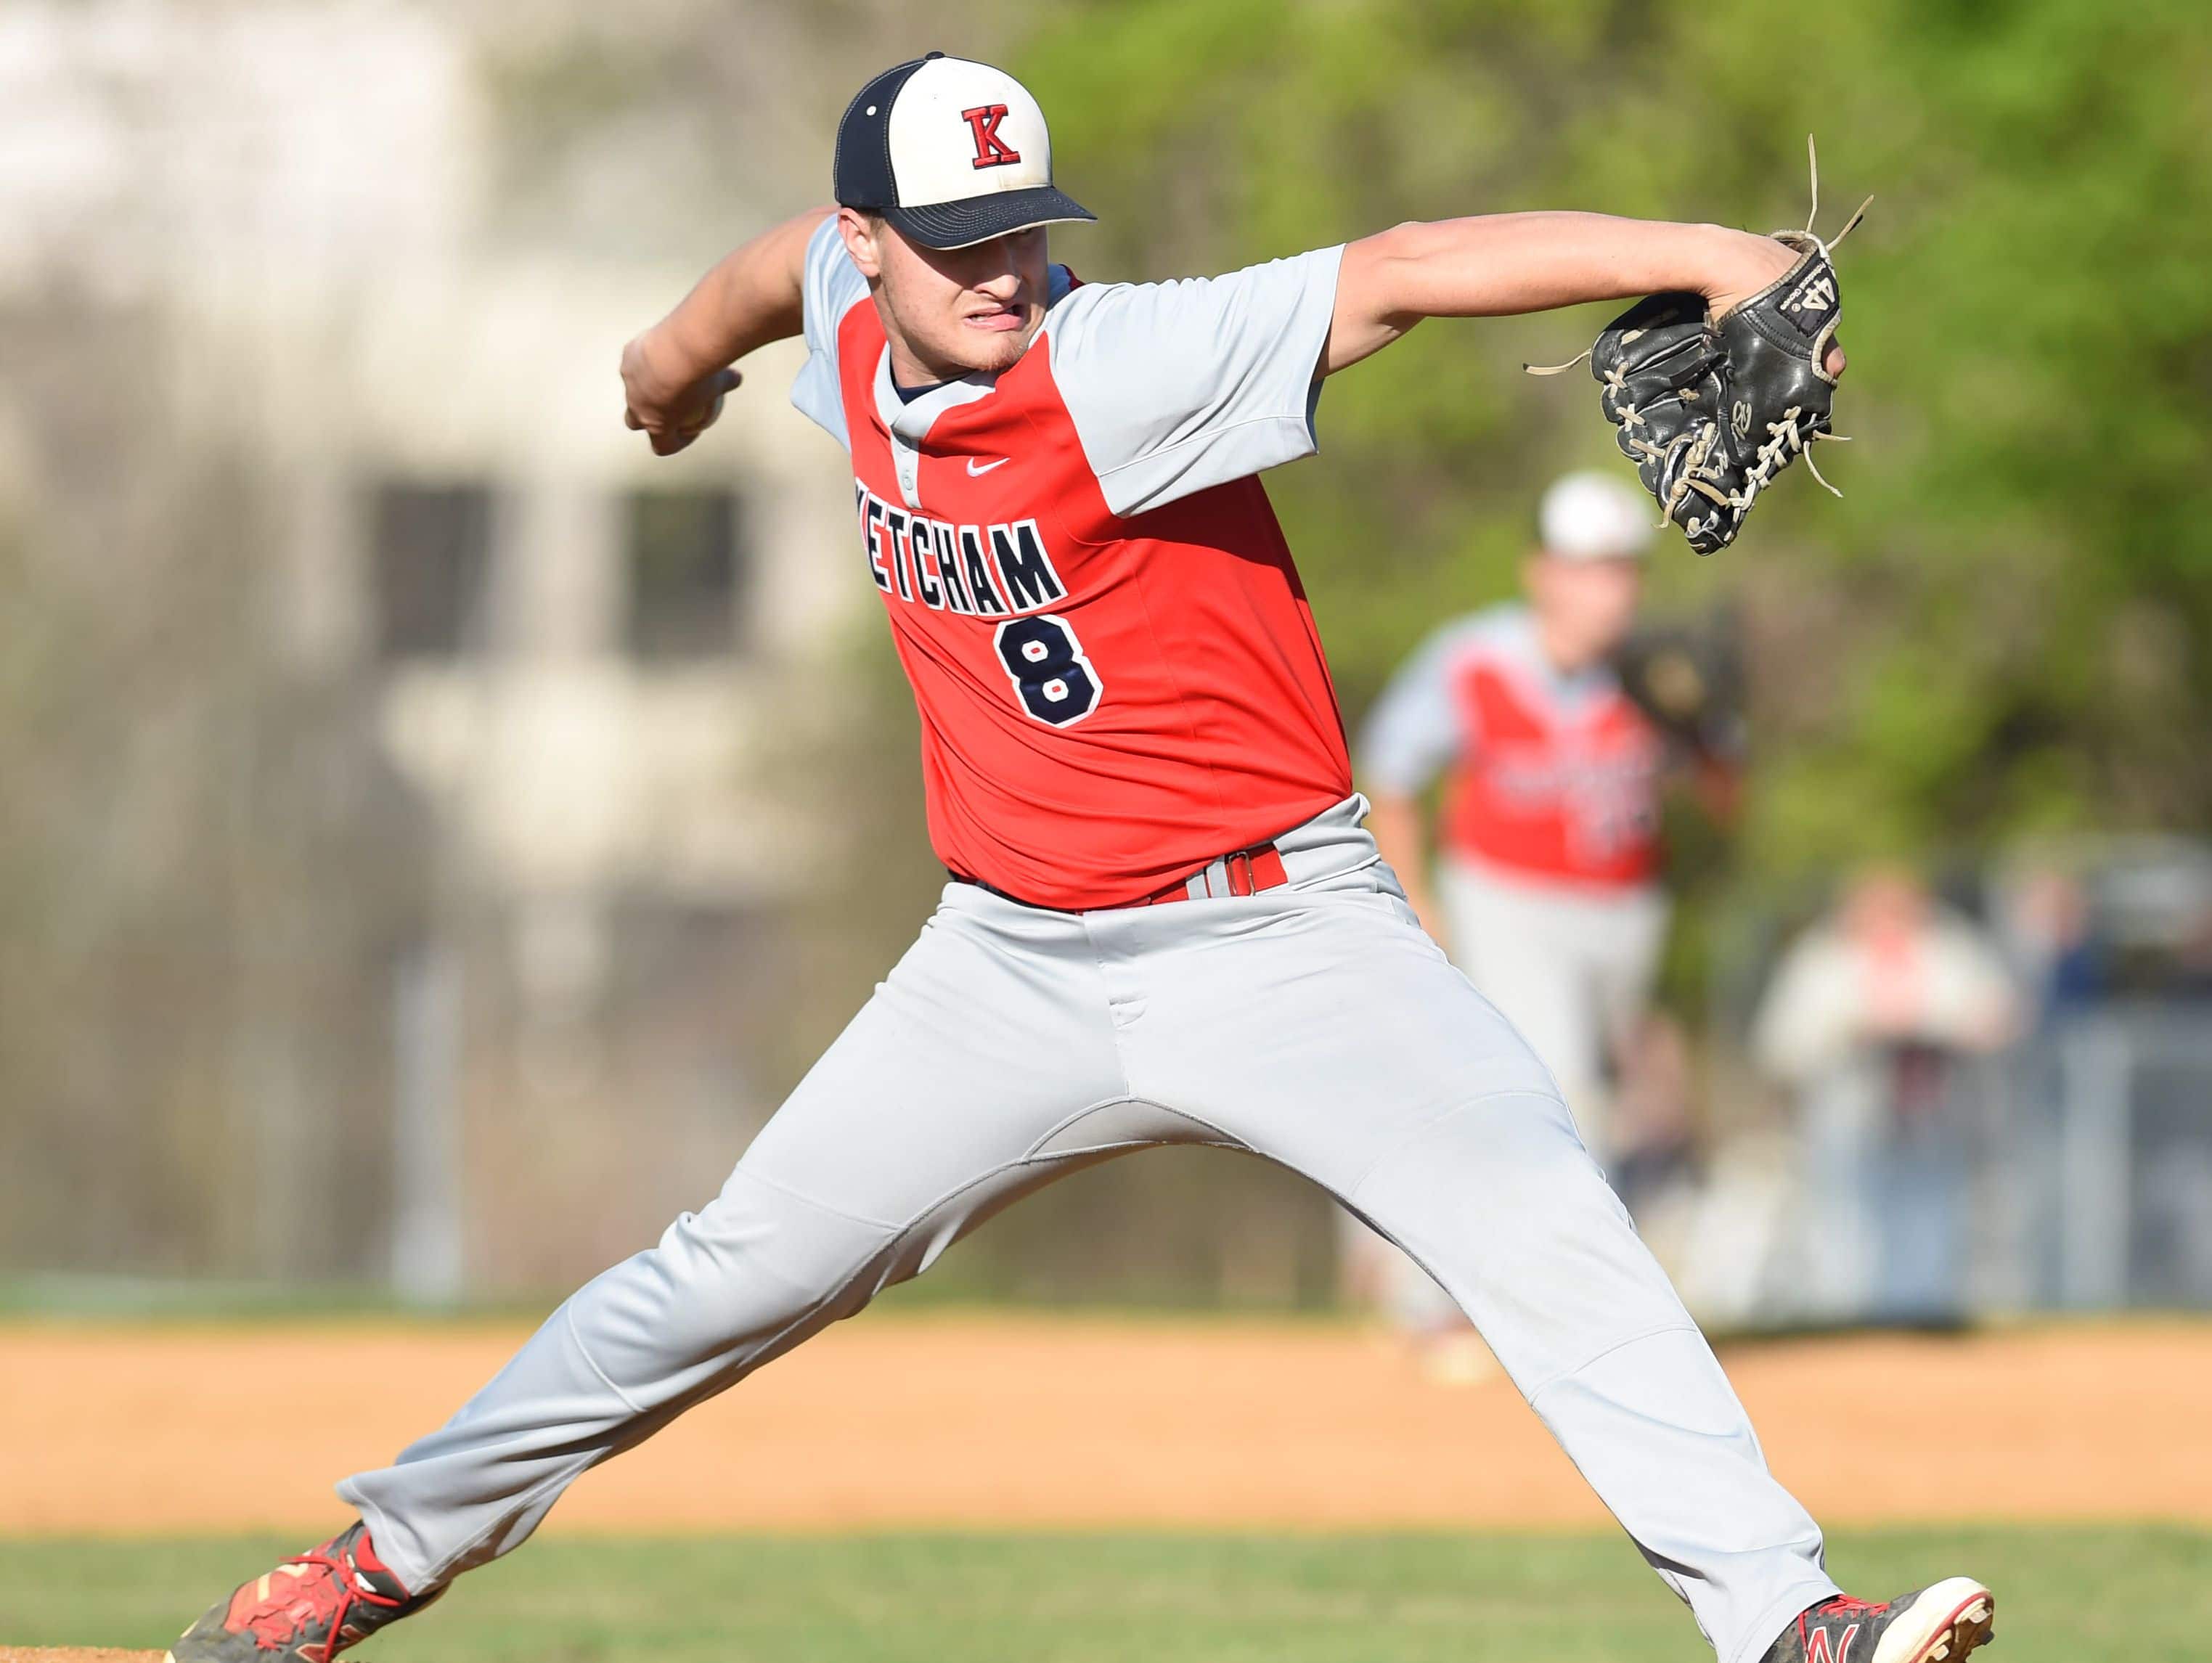 Ketcham's Greg Blum pitches during Wednesday's game at John Jay.